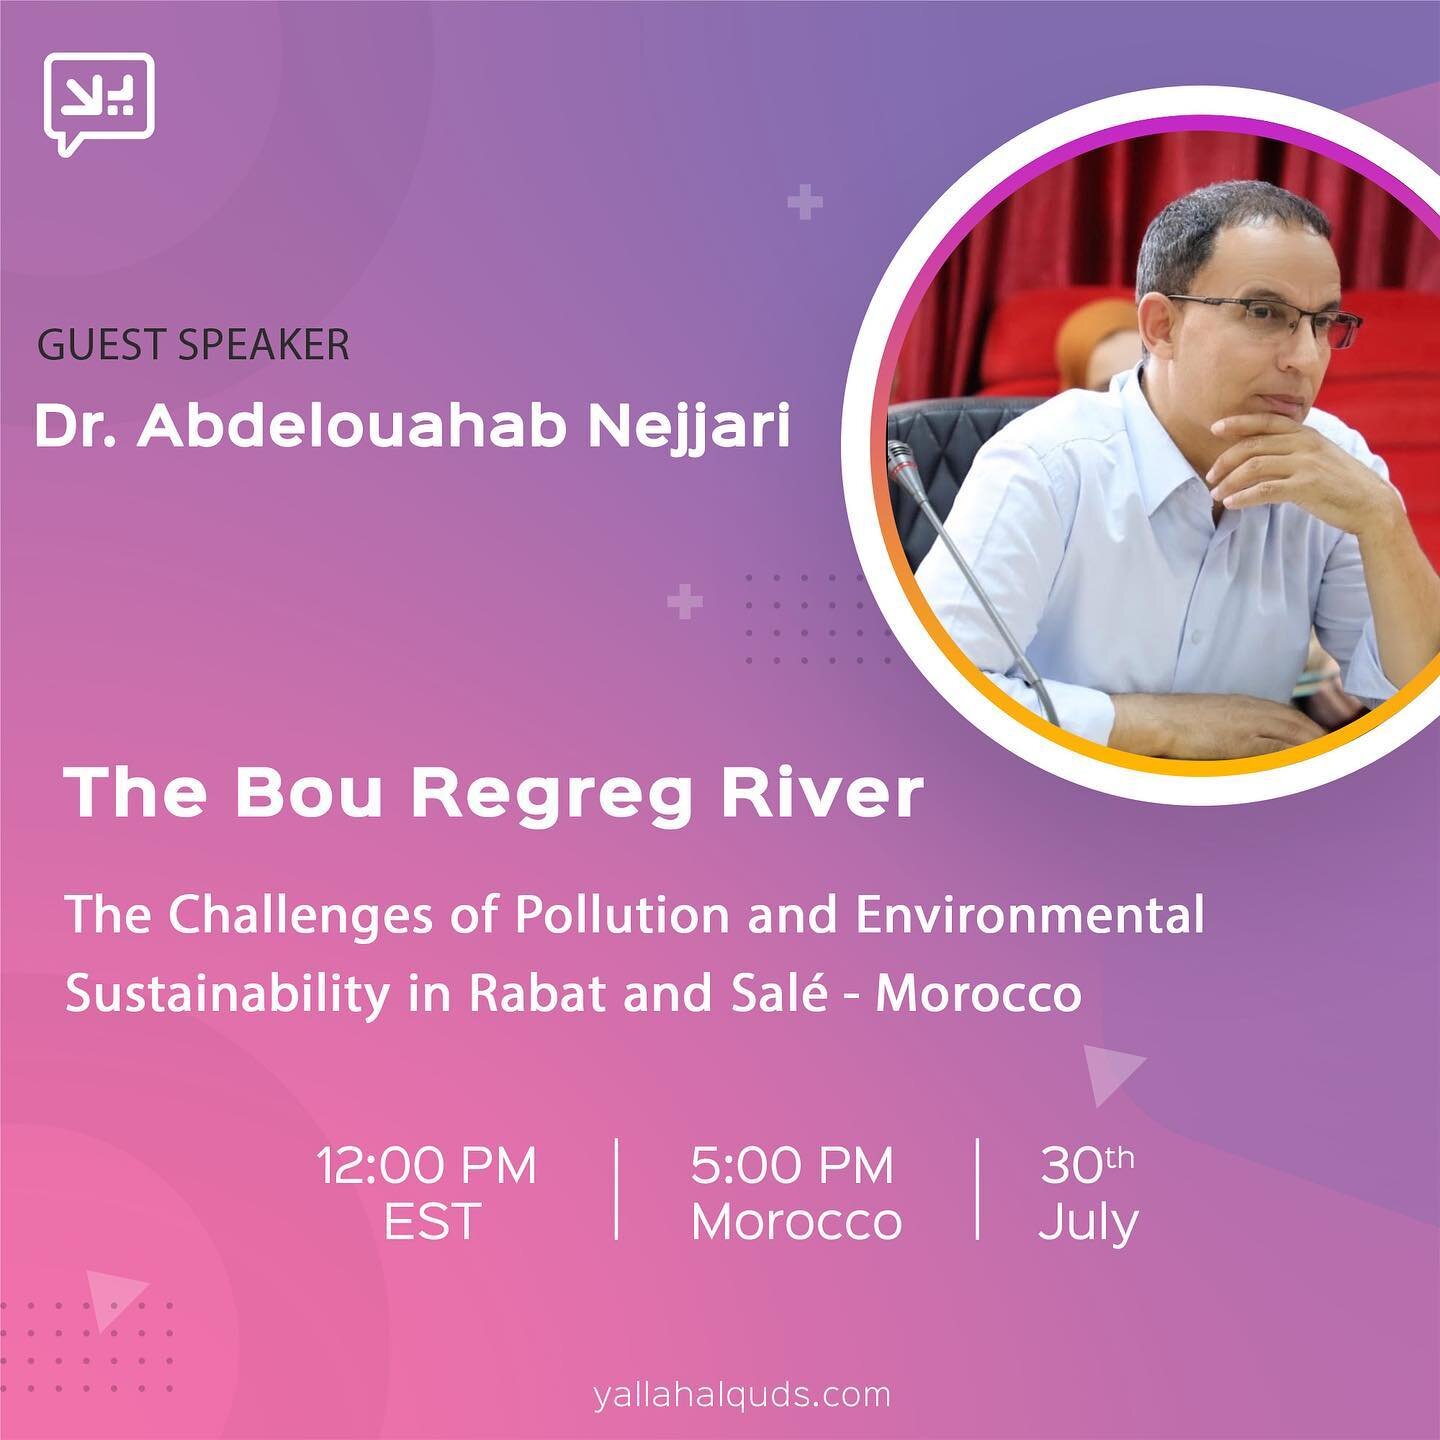 We are excited to announce Yallah al-Quds&rsquo; Summer 2022 Lecture: &ldquo;The Bou Regreg River: The Challenges of Pollution and Environmental Sustainability in Rabat and Sale, Morocco&rdquo; with Dr. Abdelouahab Nejjari. The event will take place 